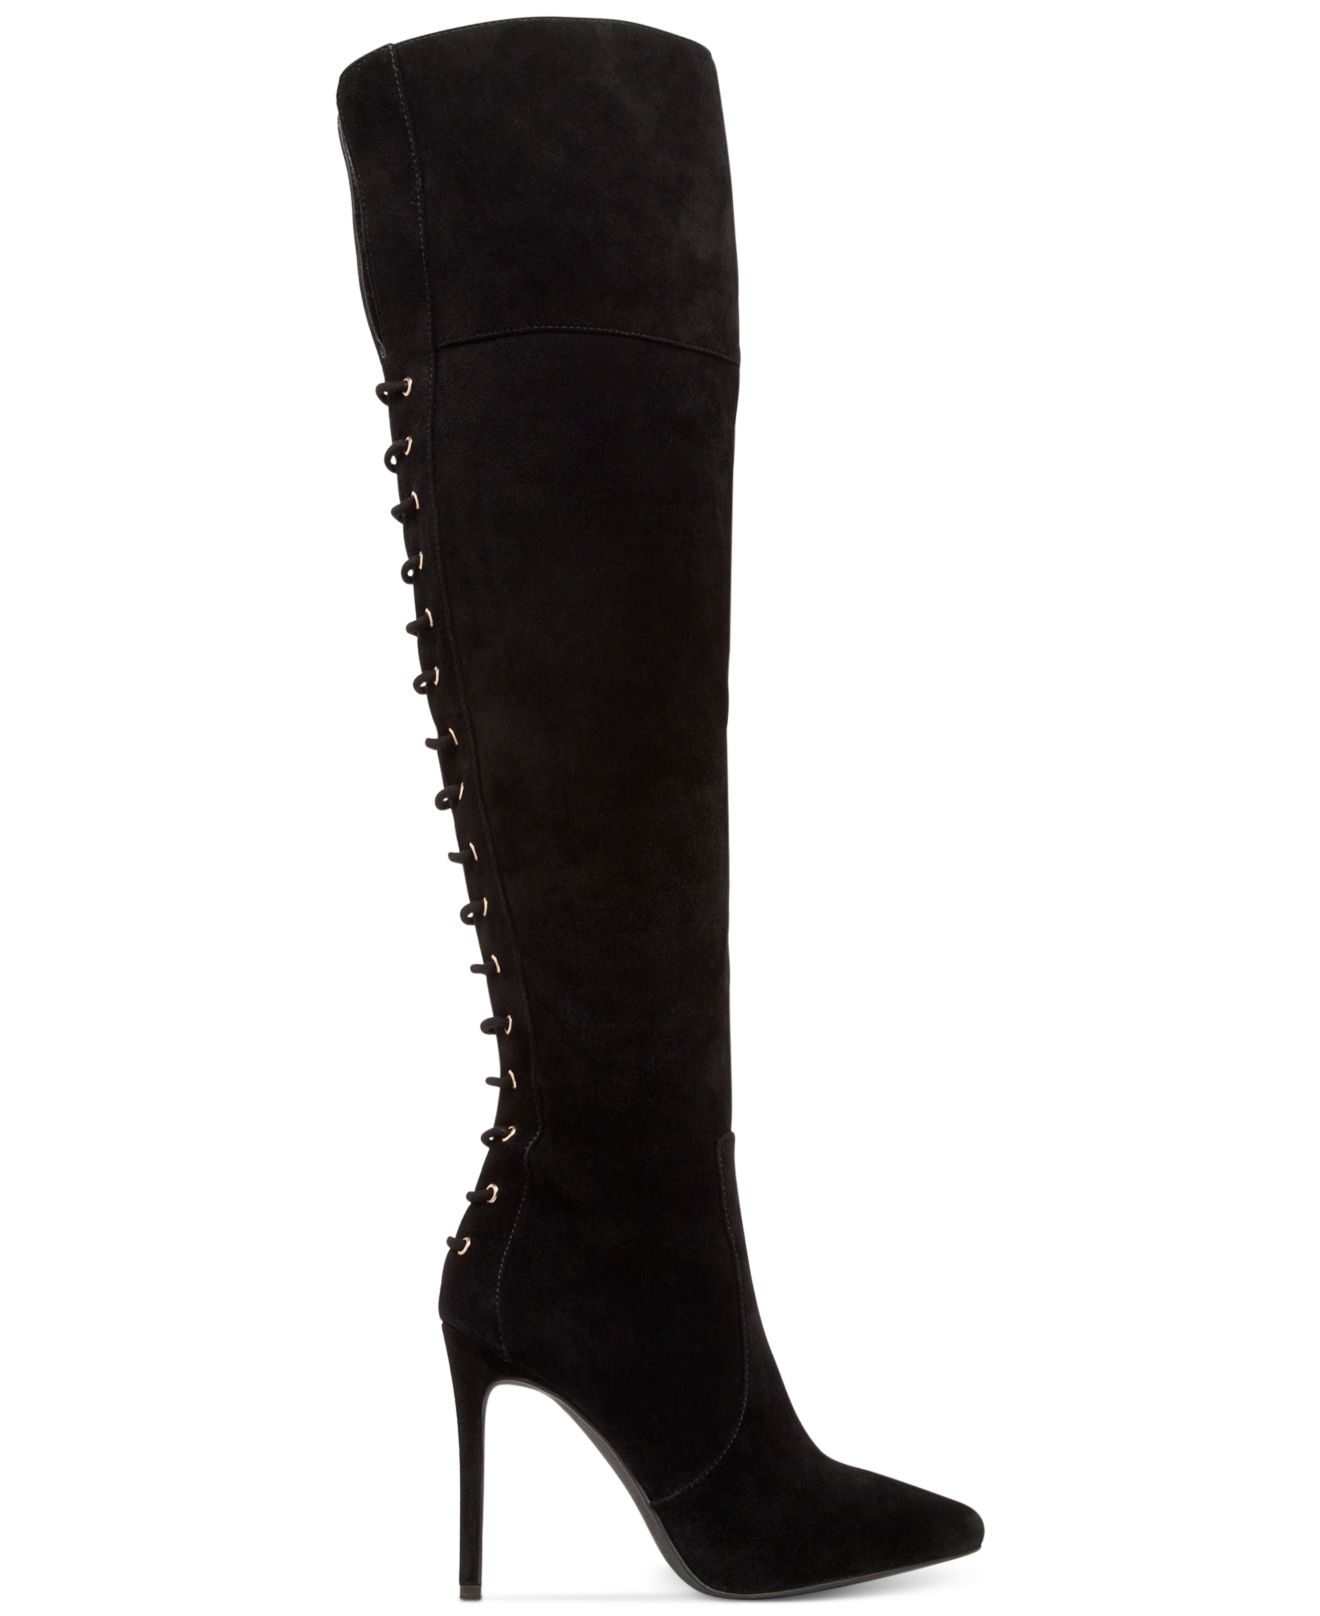 Jessica Simpson Suede Parii Corset Over-the-knee Boots in Black - Lyst